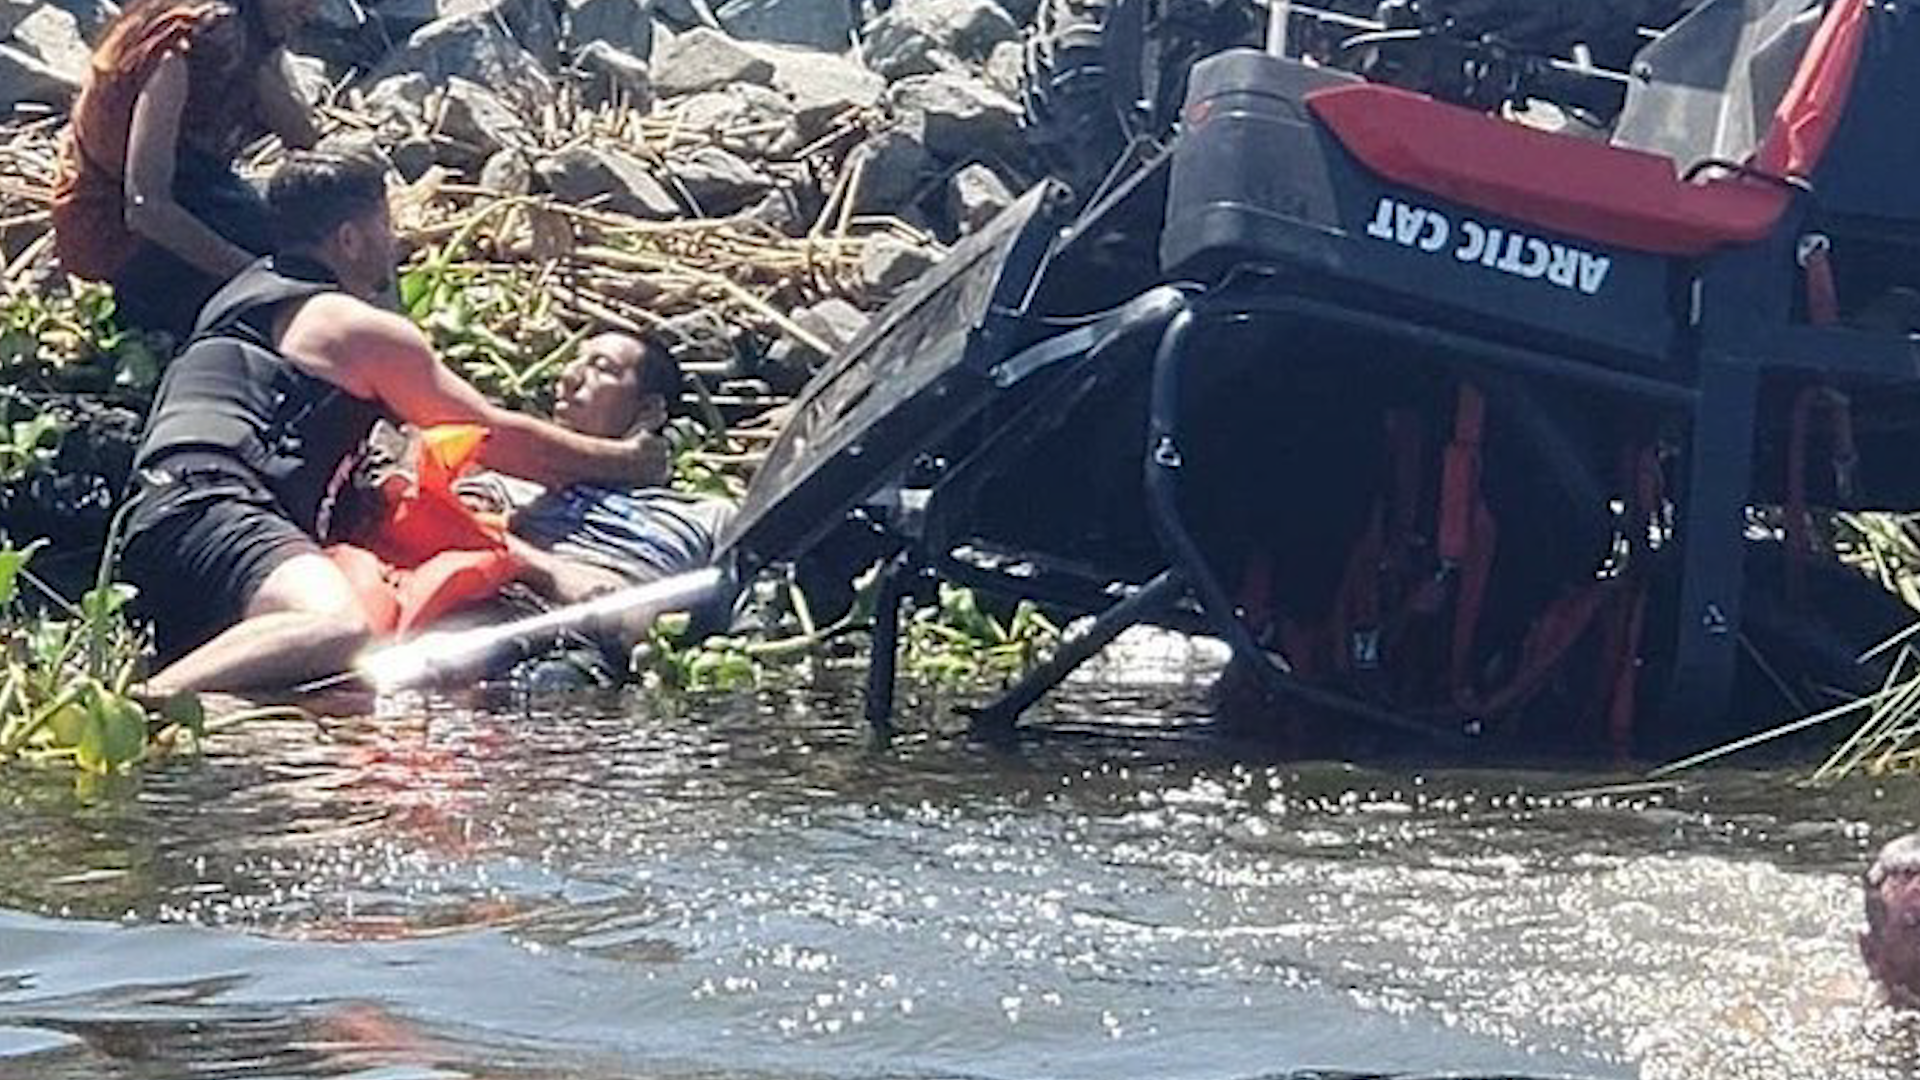 The two men were boating on the Delta when they saw an overturned ATV in the water.